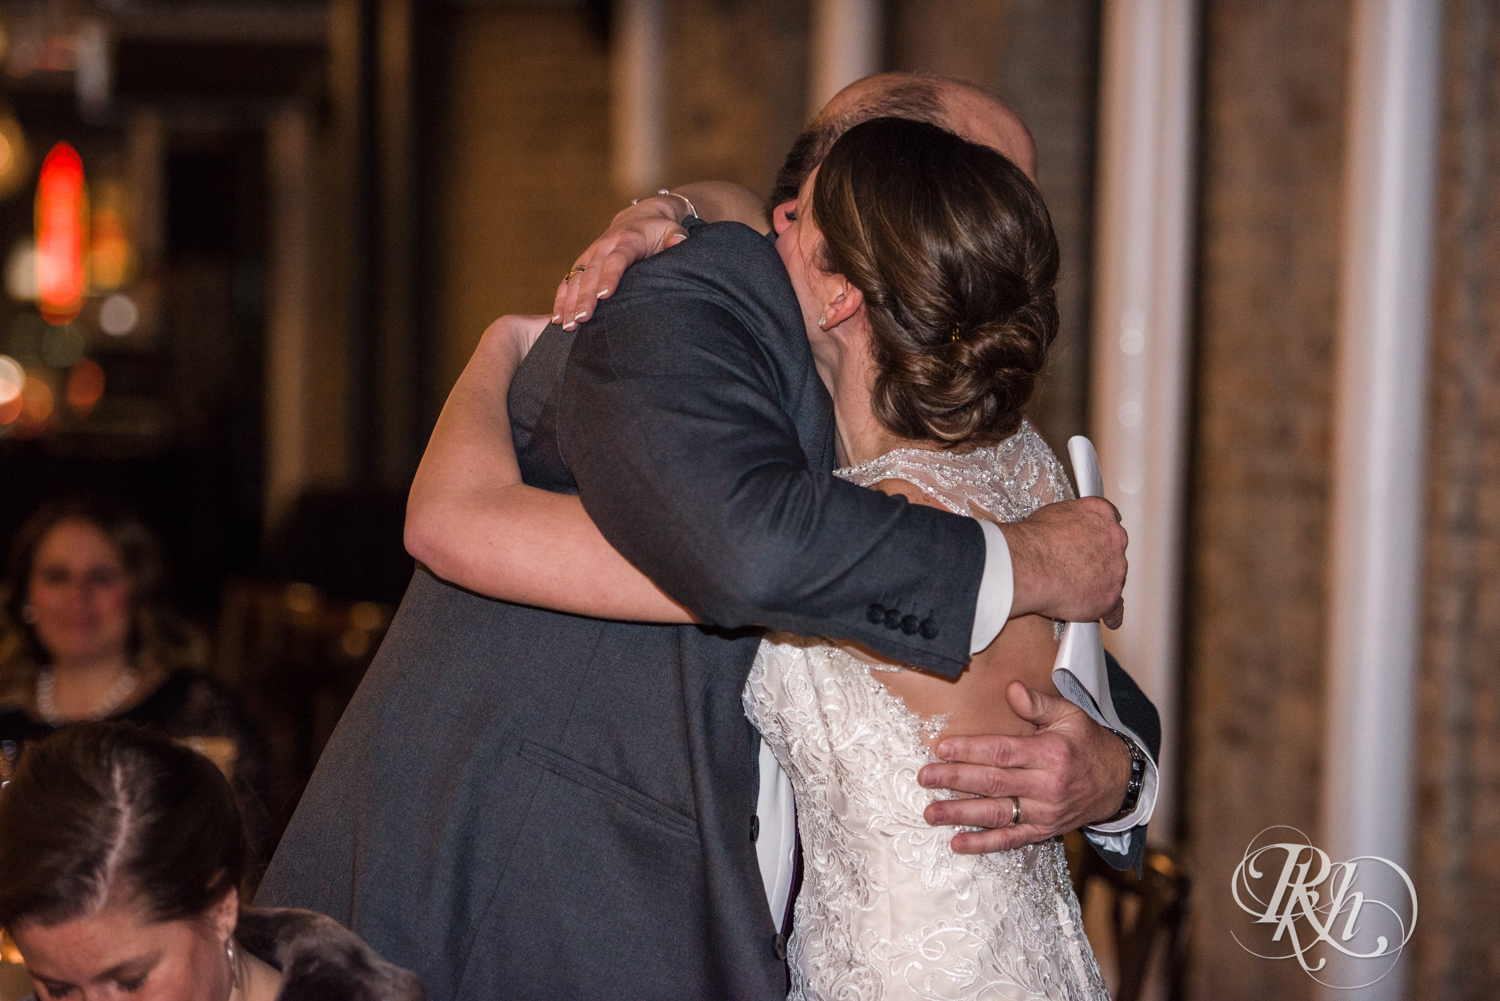 Bride hugs dad during speeches at wedding reception at the Lumber Exchange Event Center in Minneapolis, Minnesota.